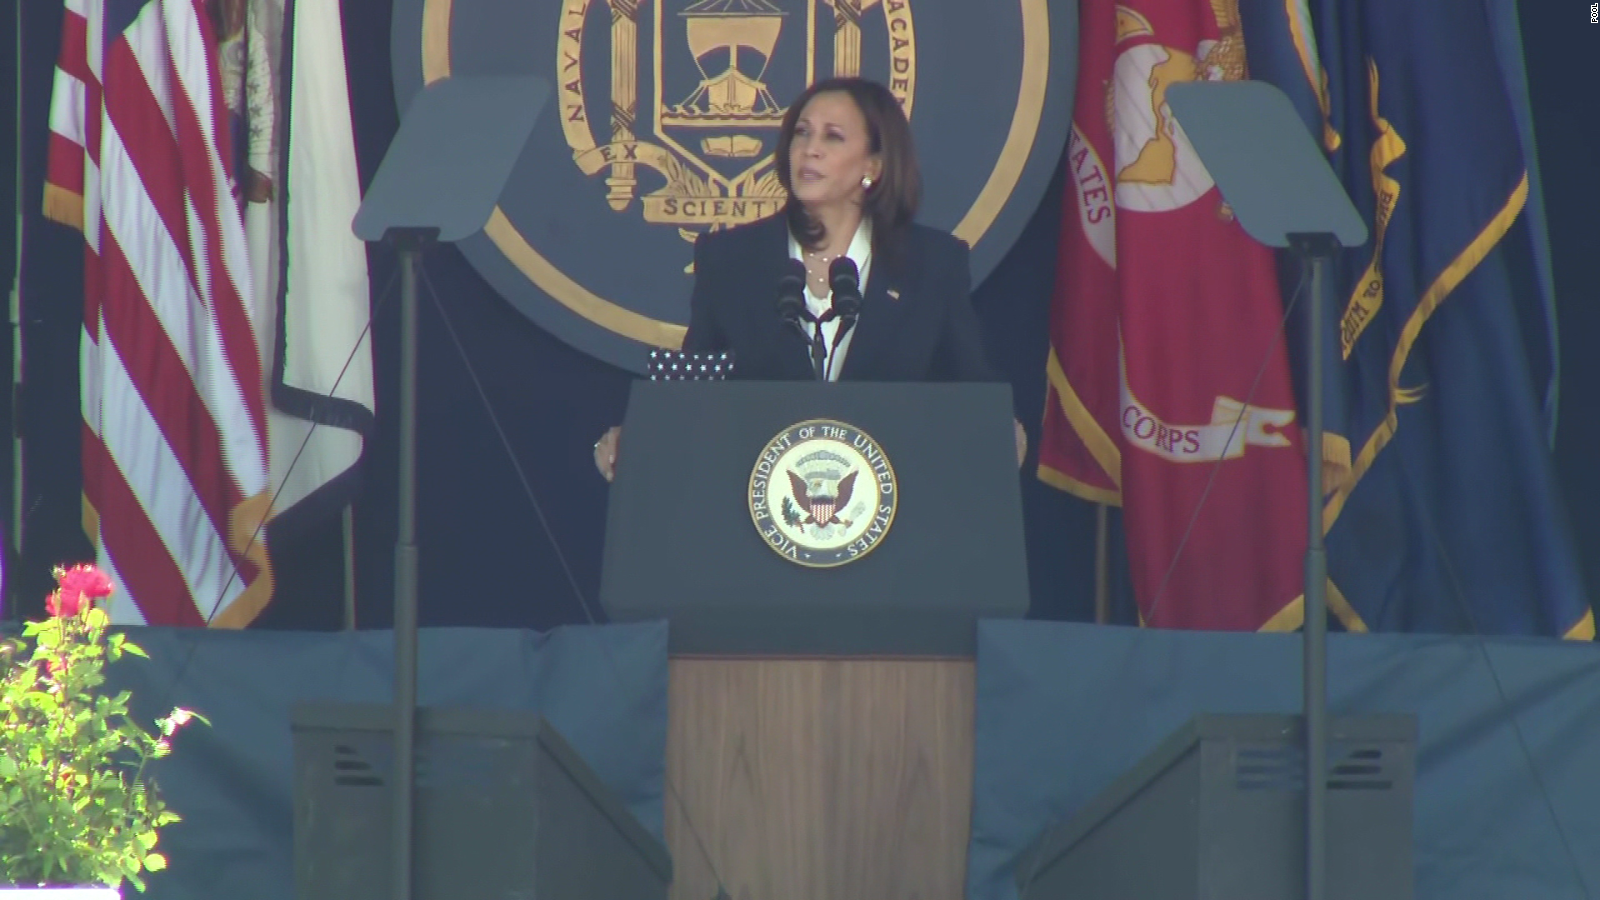 Harris first female US Naval Academy commencement speaker